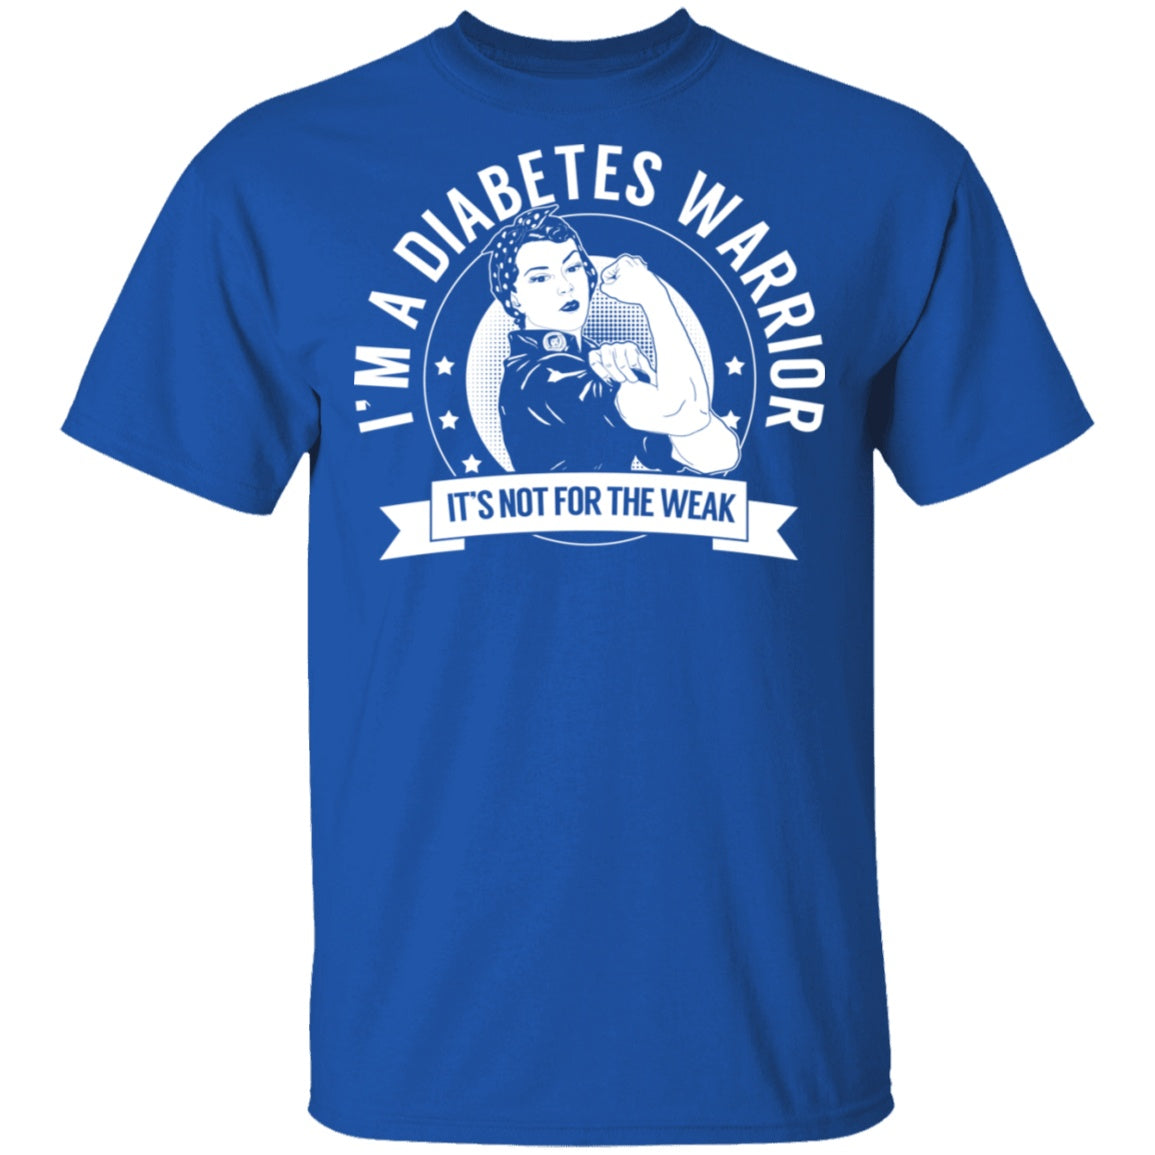 Diabetes Warrior Not For The Weak Shirts, Tank And Hoodie - The Unchargeables